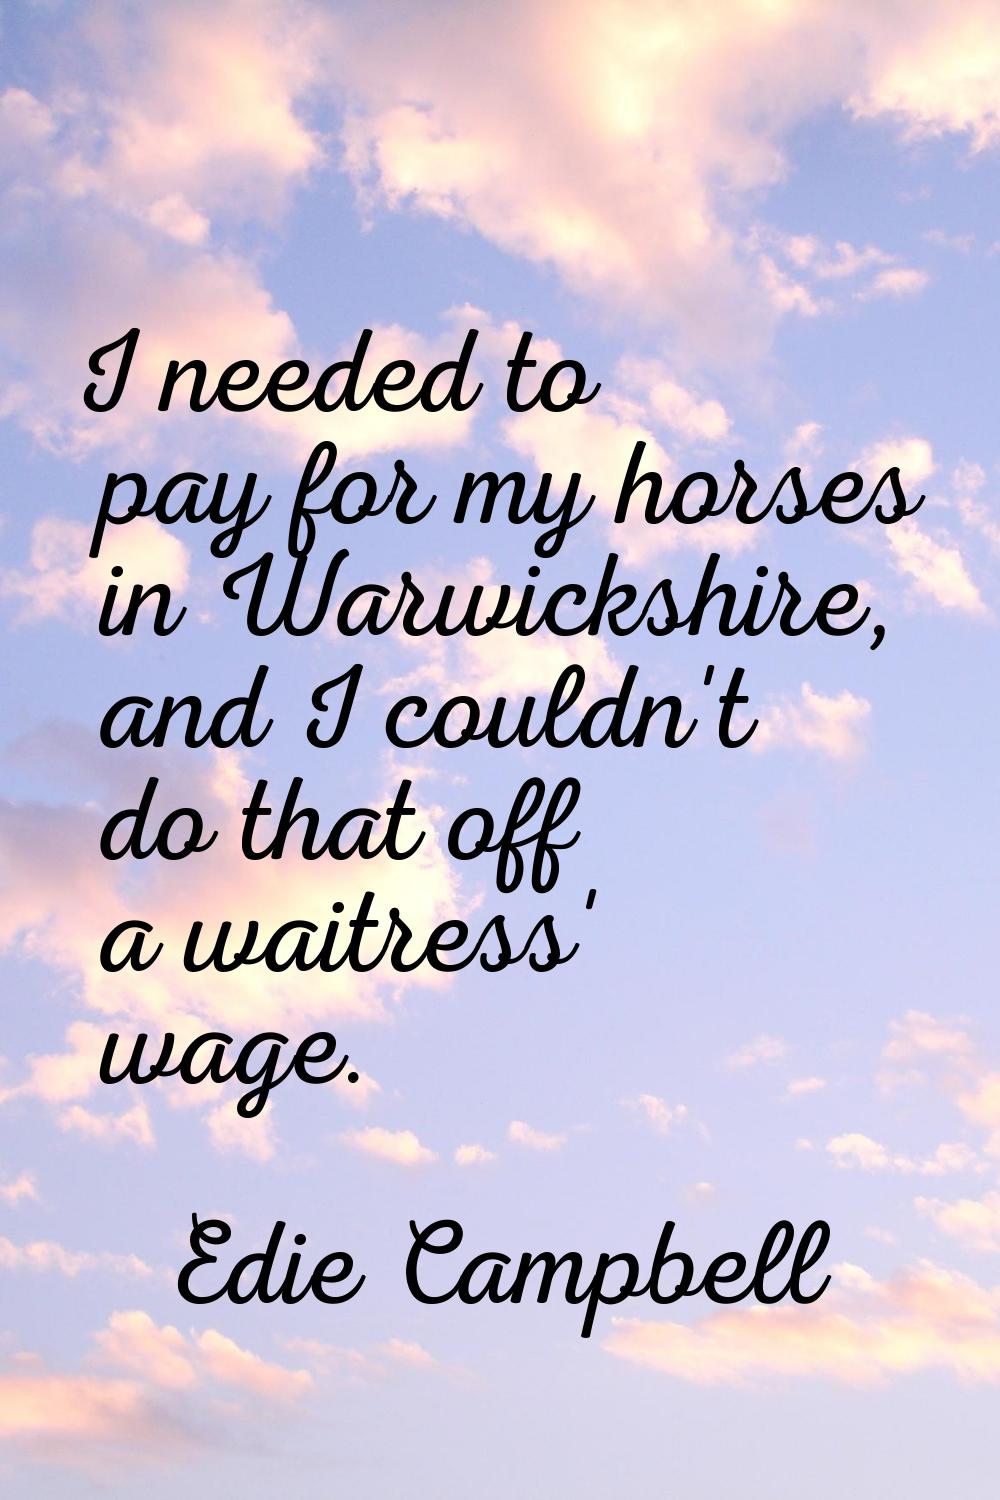 I needed to pay for my horses in Warwickshire, and I couldn't do that off a waitress' wage.